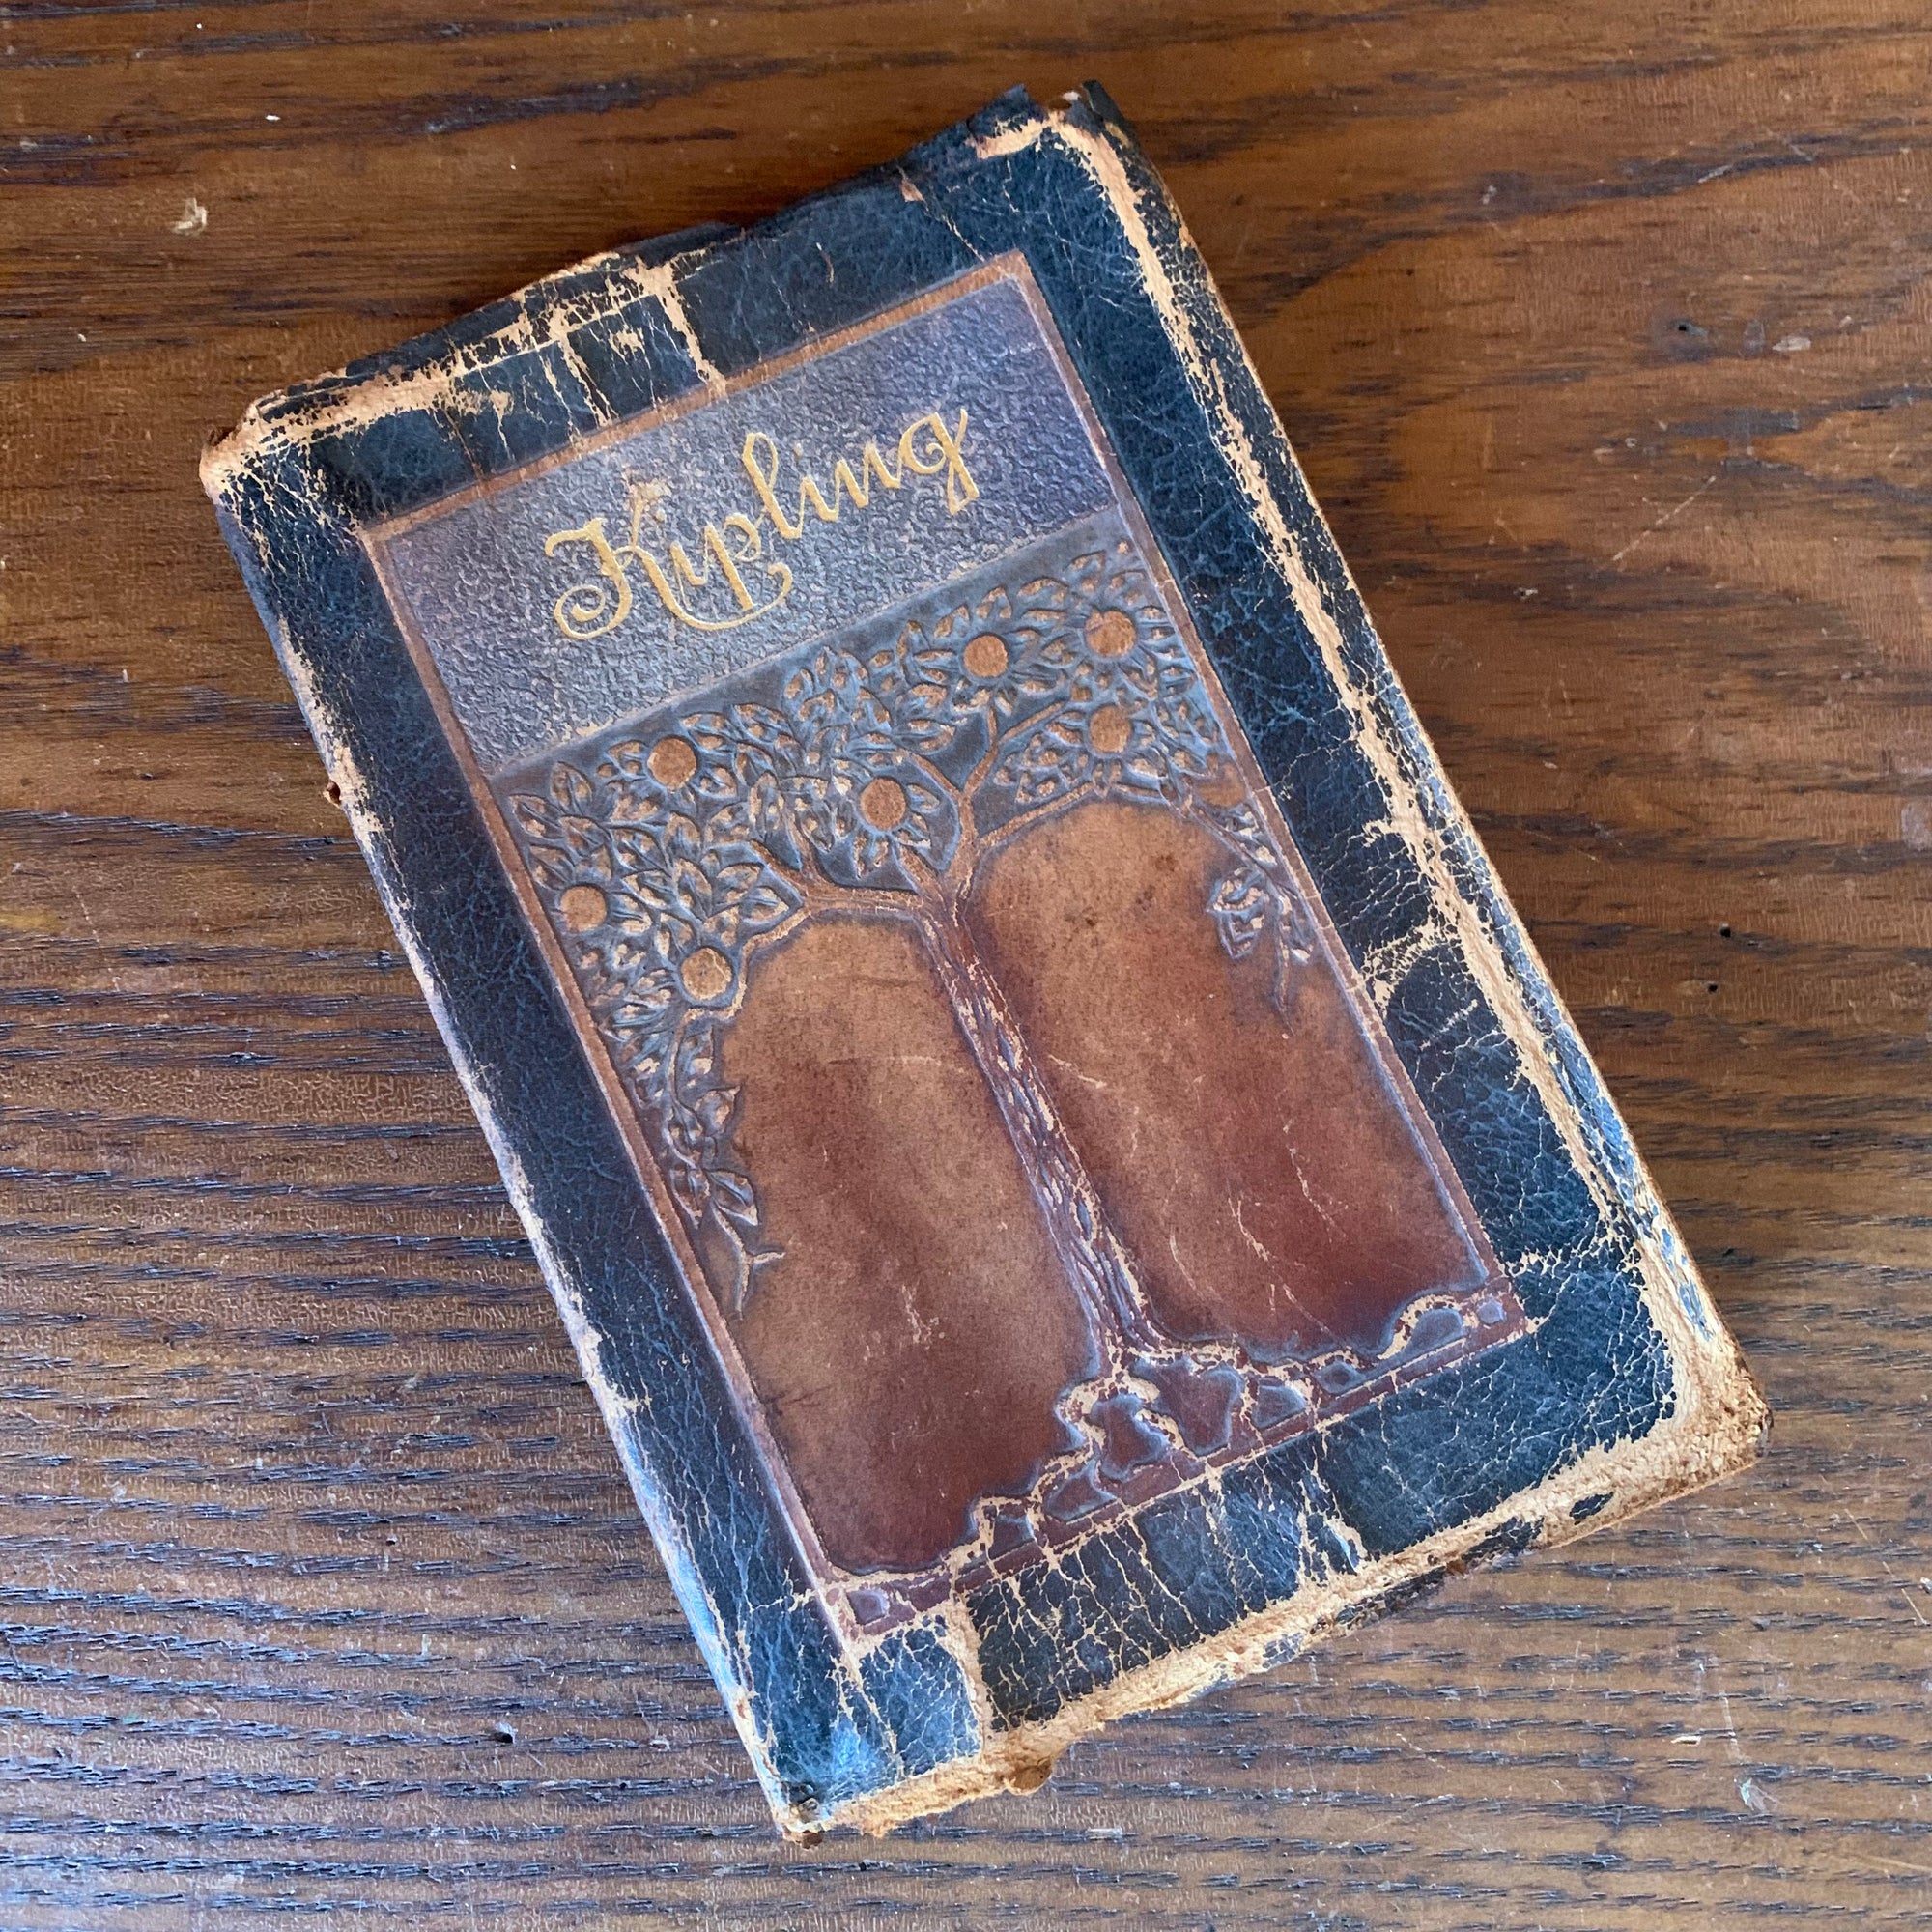 The Poems of Rudyard Kipling - Embossed Leatherbound Edition - Antique Book